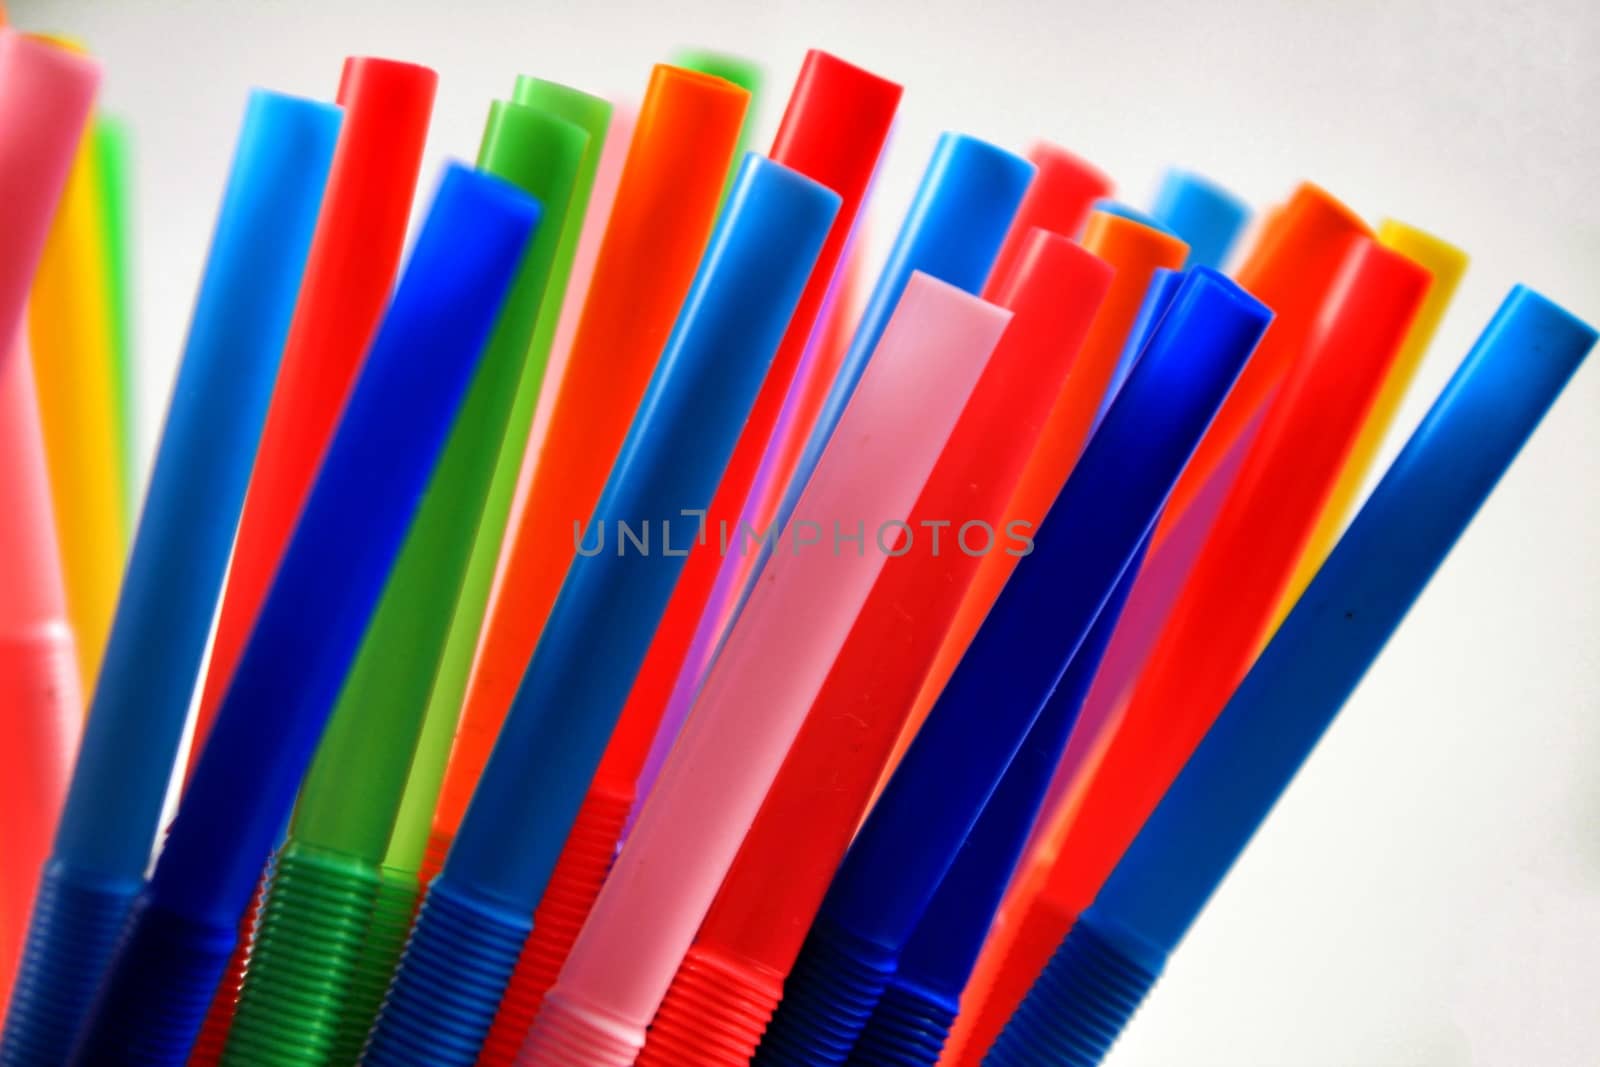 Colorful plastic drinking straws close up white background